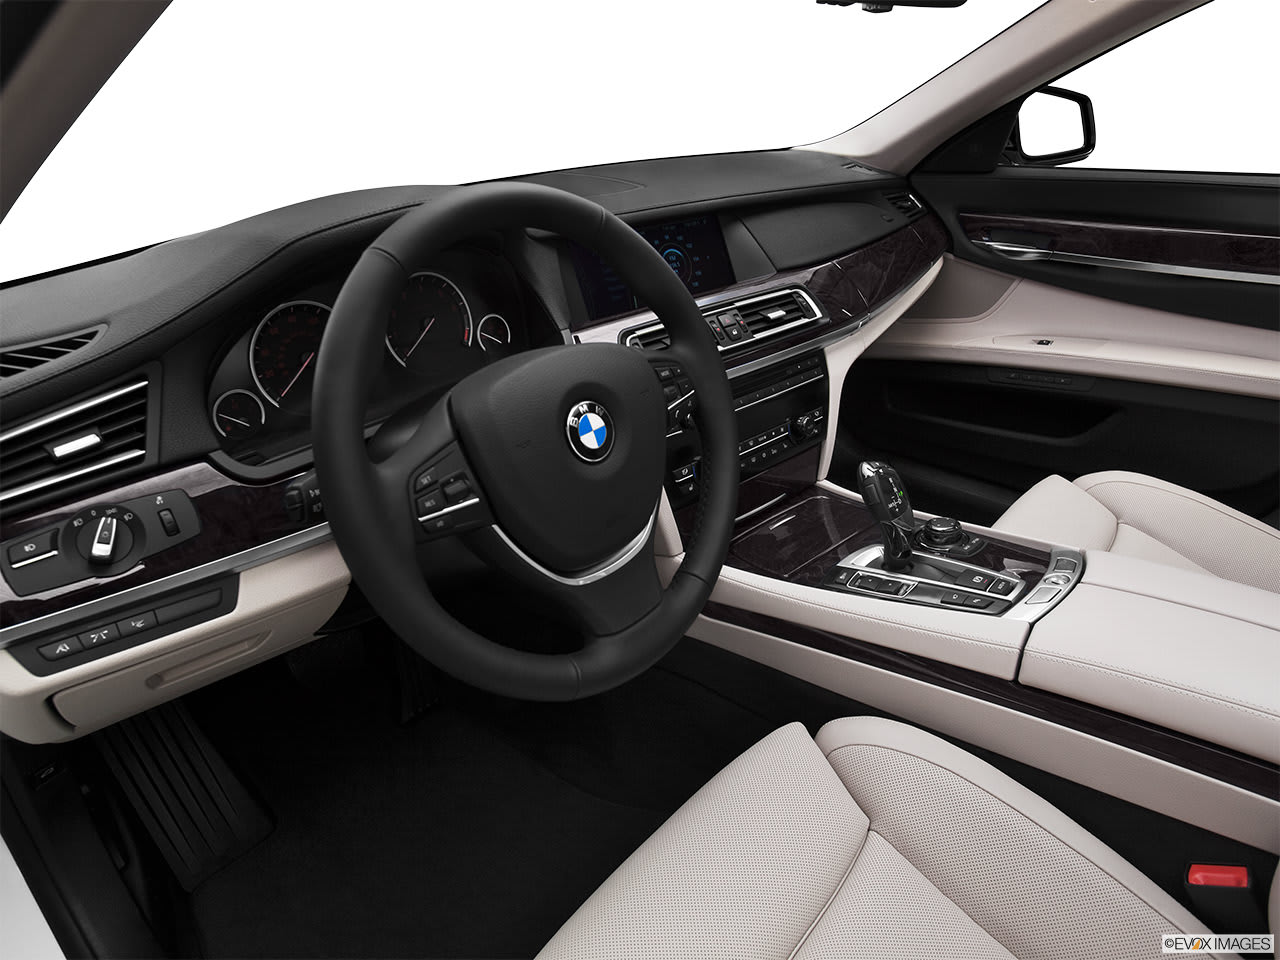 A Buyer's Guide to the 2012 BMW ActiveHybrid 5 | YourMechanic Advice